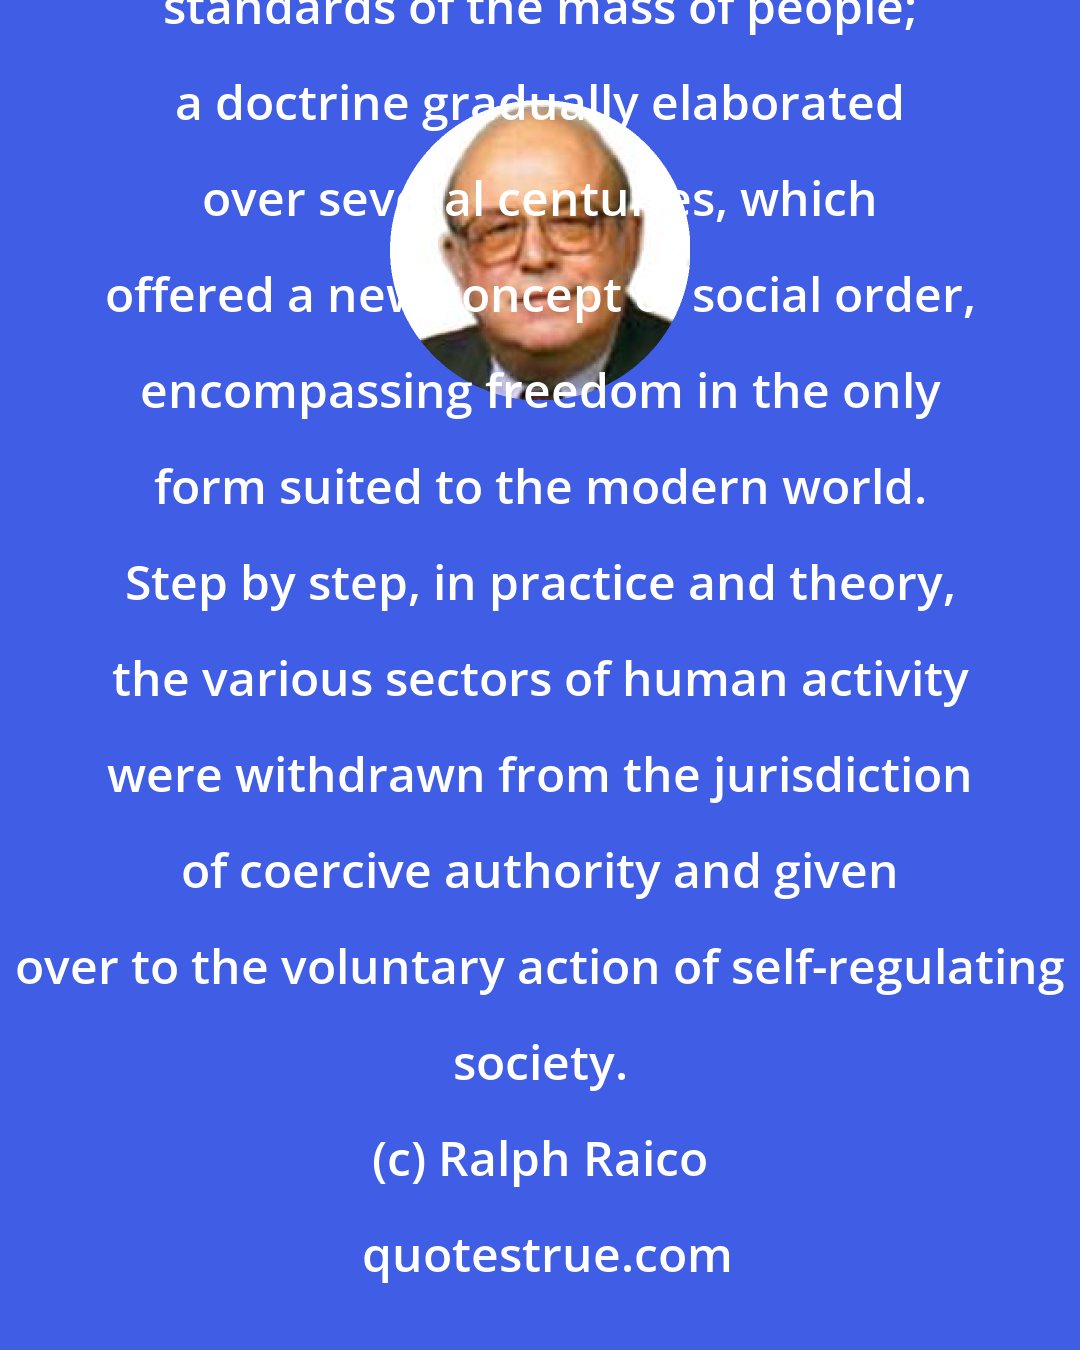 Ralph Raico: Liberalism is, in fact, the ideology of the capitalist revolution that prodigiously raised the living standards of the mass of people; a doctrine gradually elaborated over several centuries, which offered a new concept of social order, encompassing freedom in the only form suited to the modern world. Step by step, in practice and theory, the various sectors of human activity were withdrawn from the jurisdiction of coercive authority and given over to the voluntary action of self-regulating society.